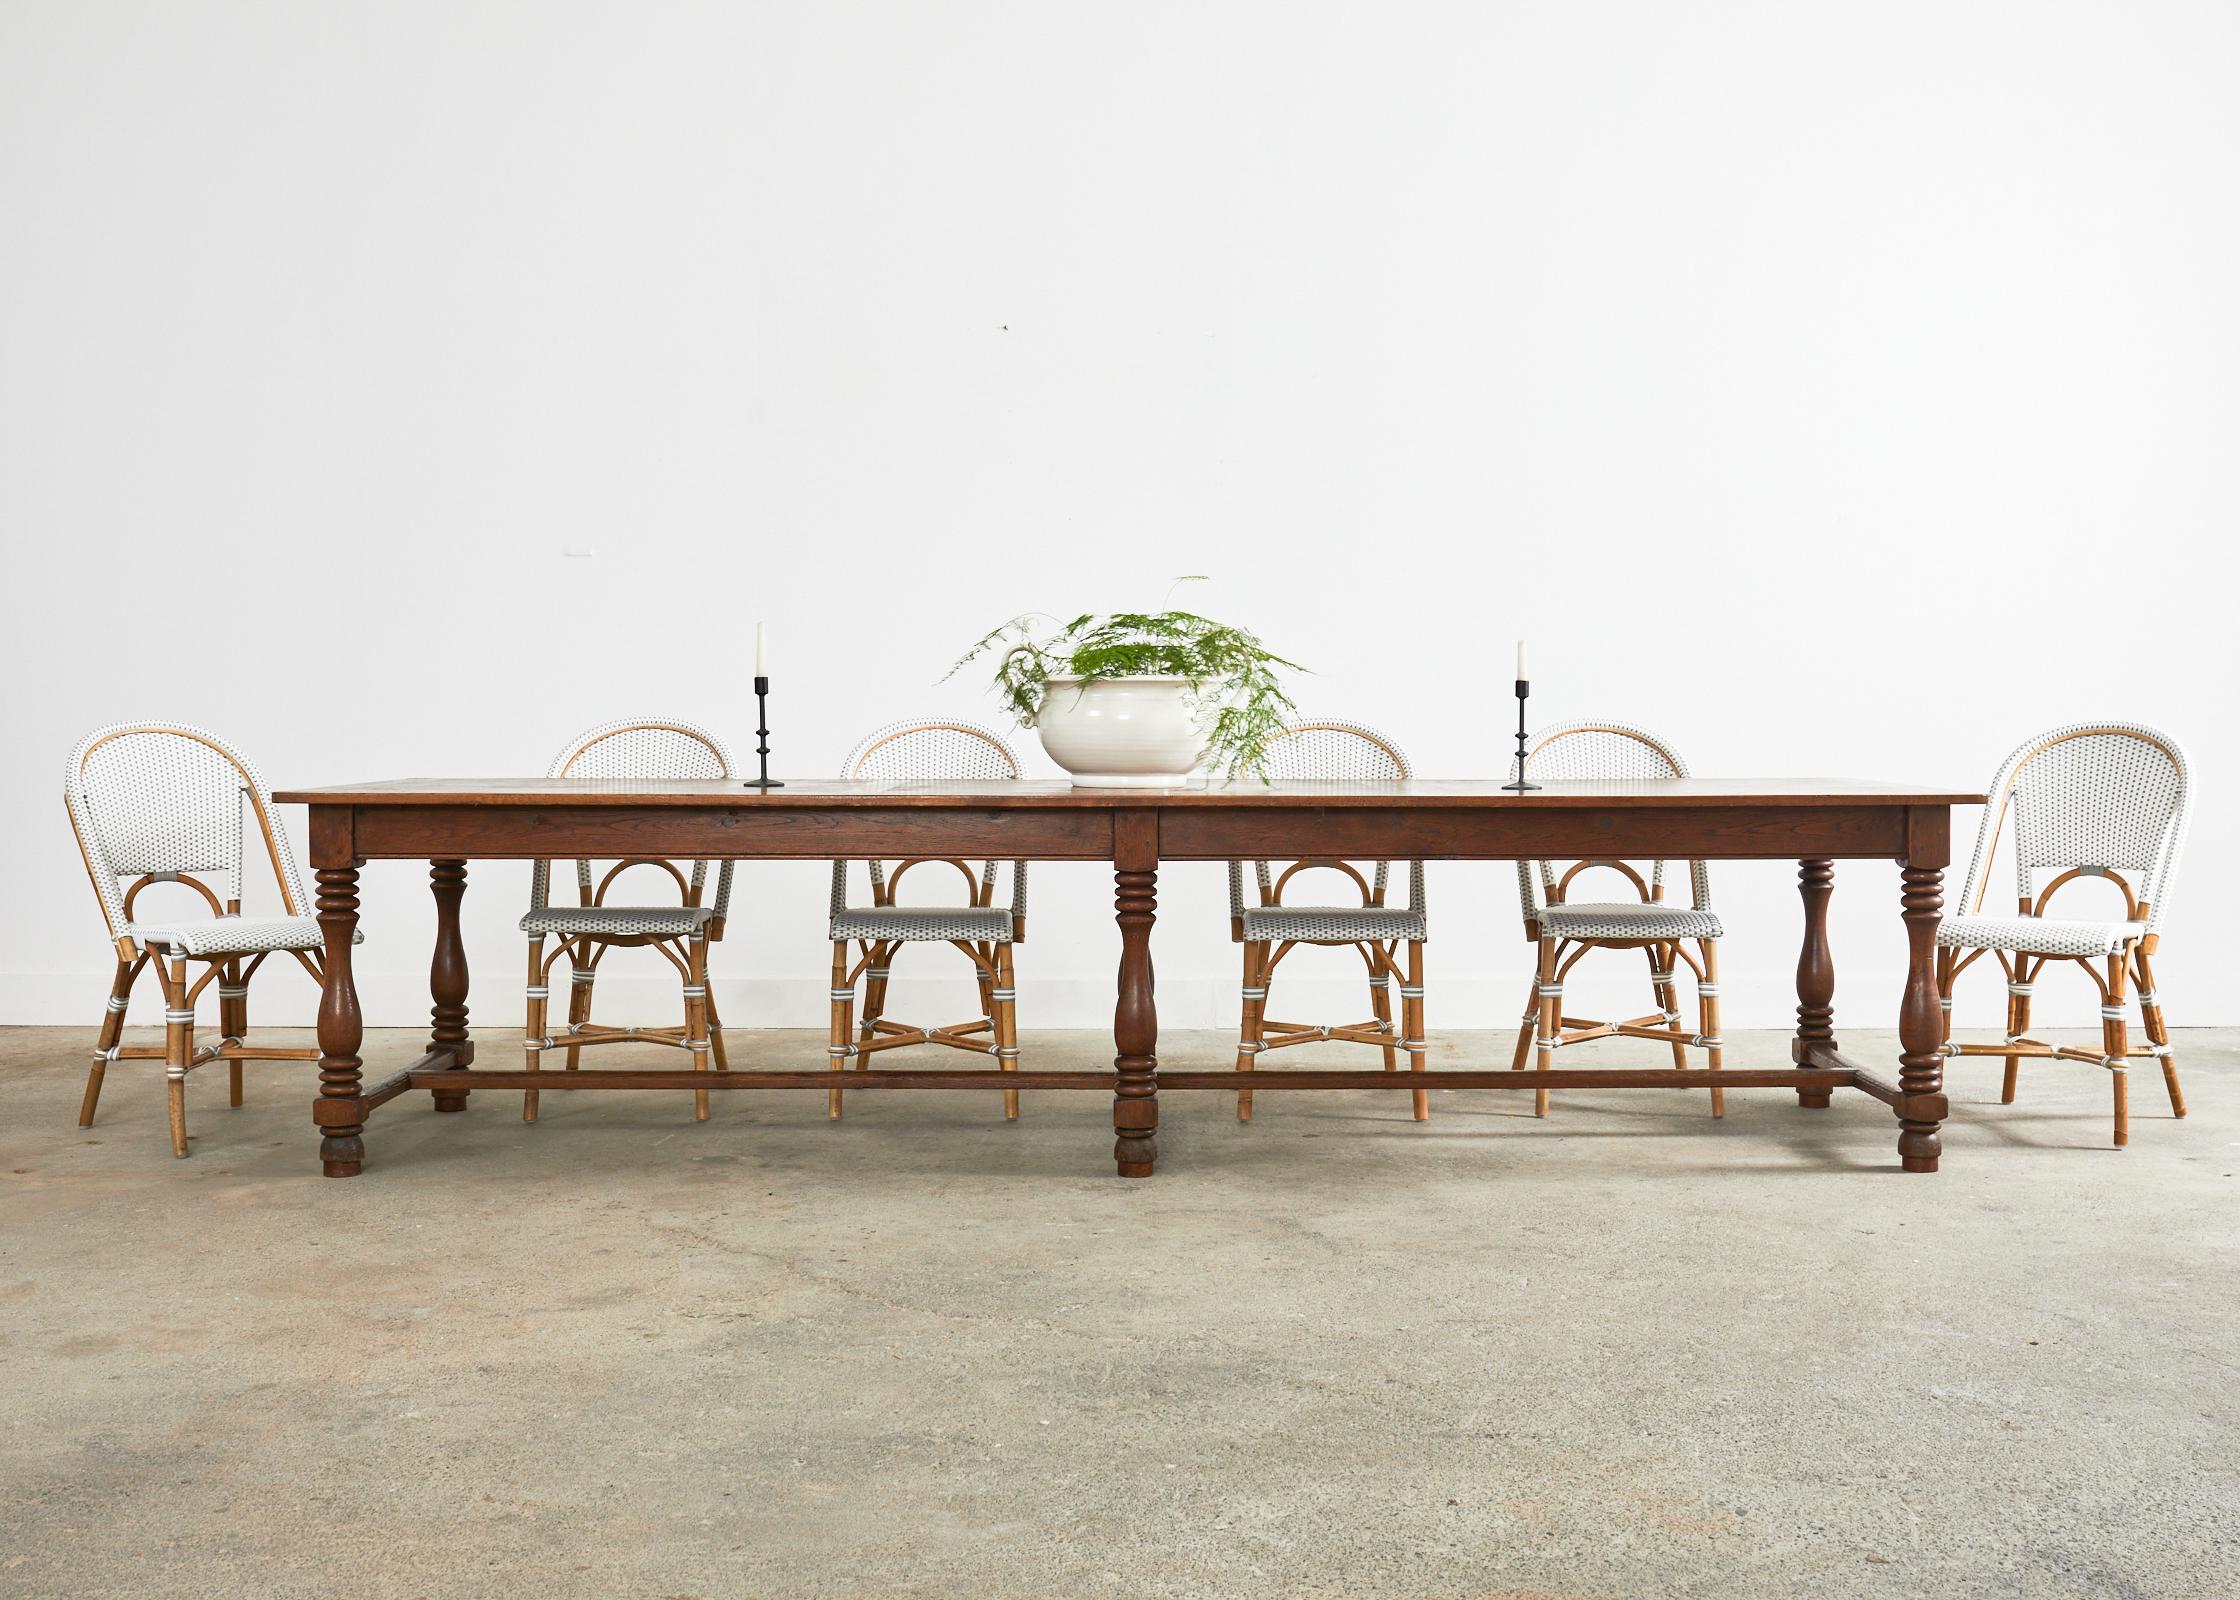 Grand 19th century country French provincial farmhouse dining table, harvest table, or refectory table crafted from oak. The monumental table features a six leg trestle style base with wood peg construction. Ample leg room measuring 24.5 inches from